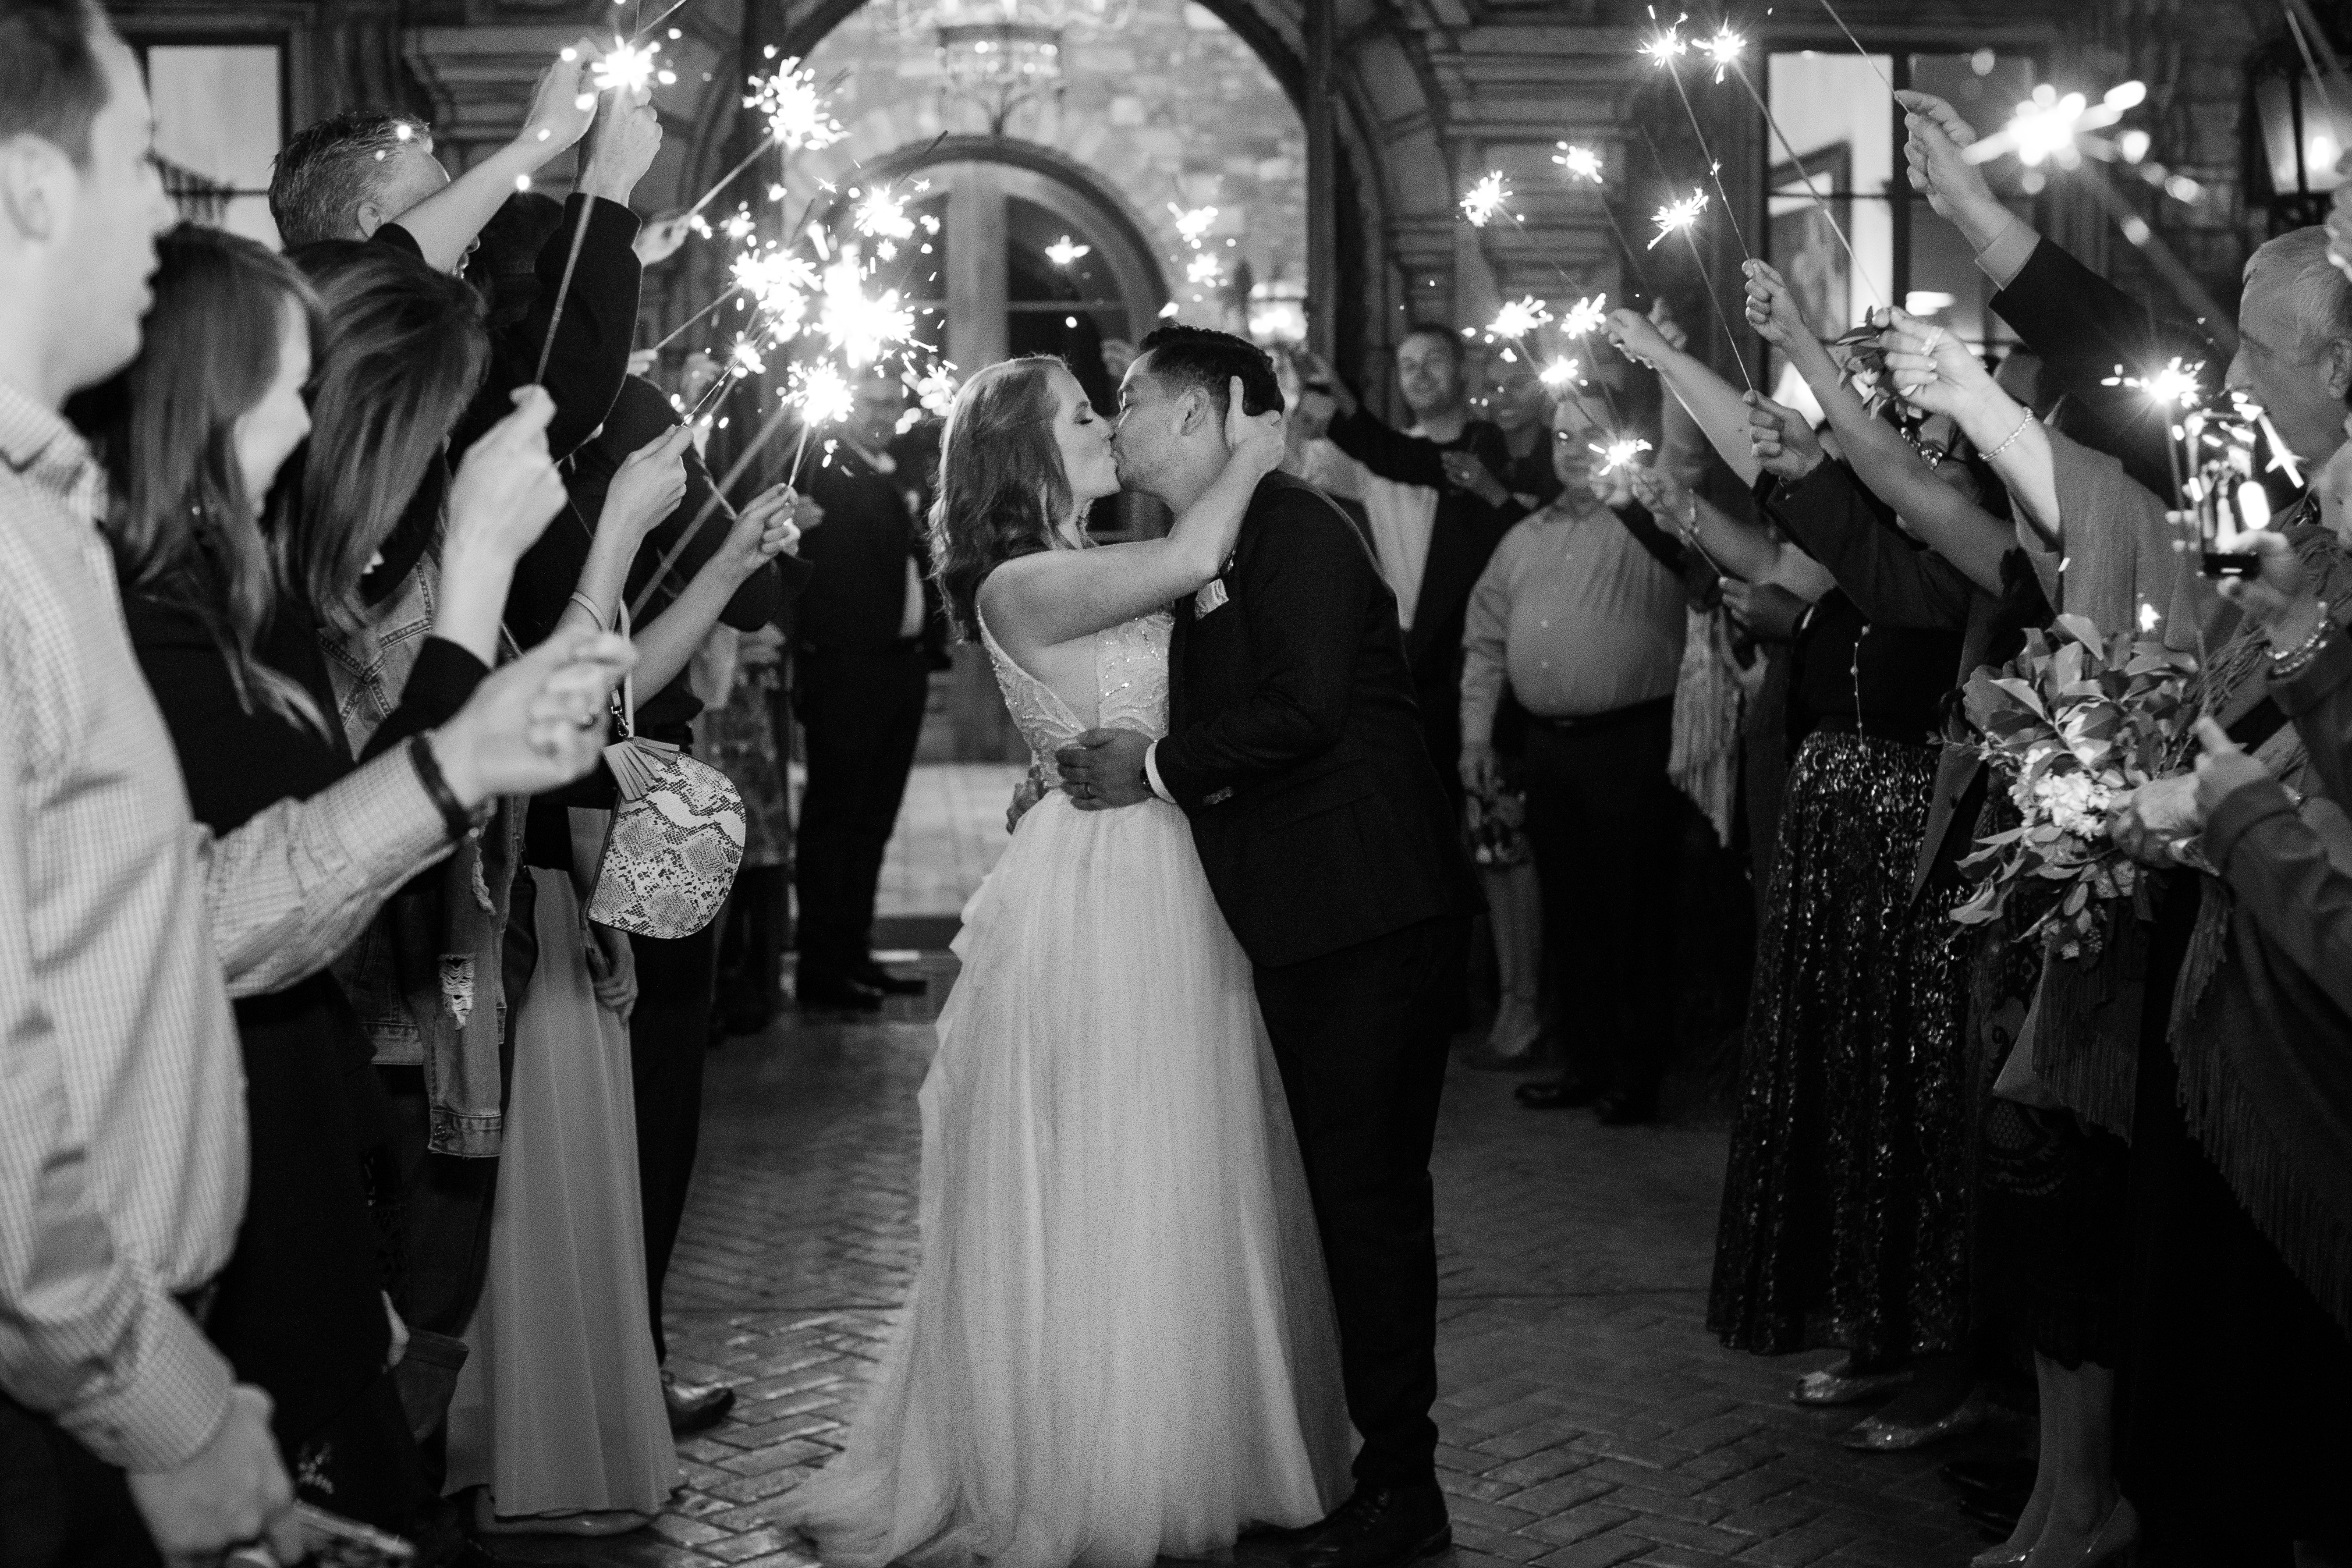 Sparkler Exits, Perfect Sparkler Exits, How to photograph sparkler exits, sparkler exits for photographers, sparkler exit help, sparkler exit wedding day